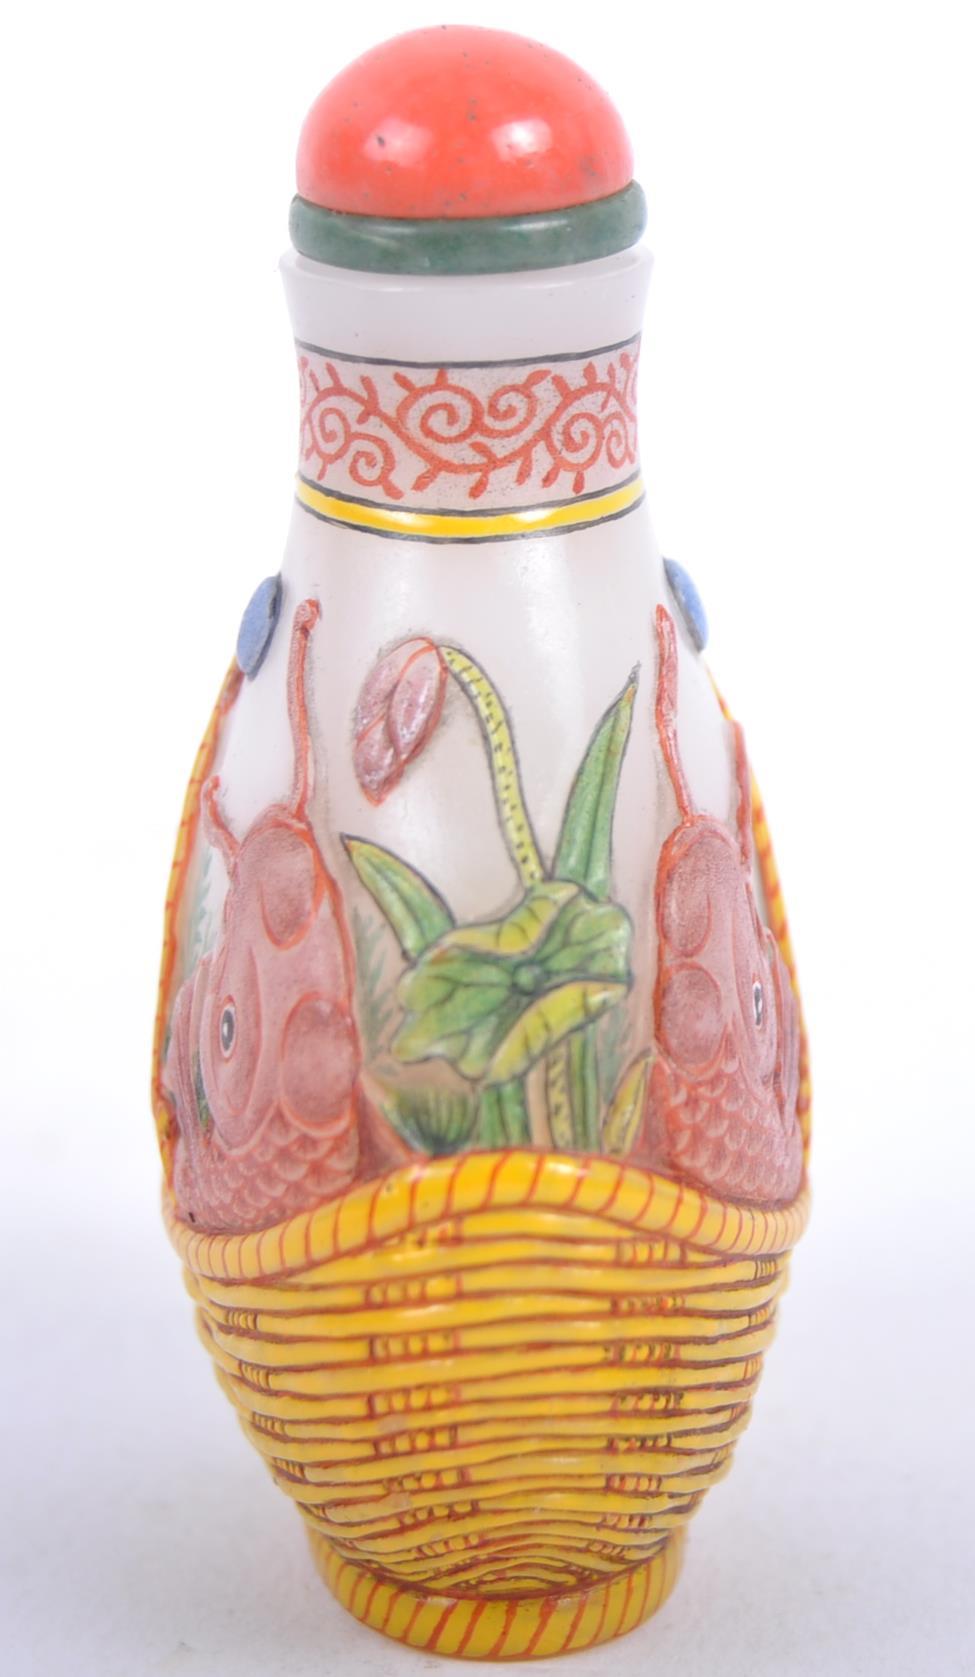 EARLY 20TH CENTURY CHINESE GLASS SNUFF BOTTLE - Image 4 of 5